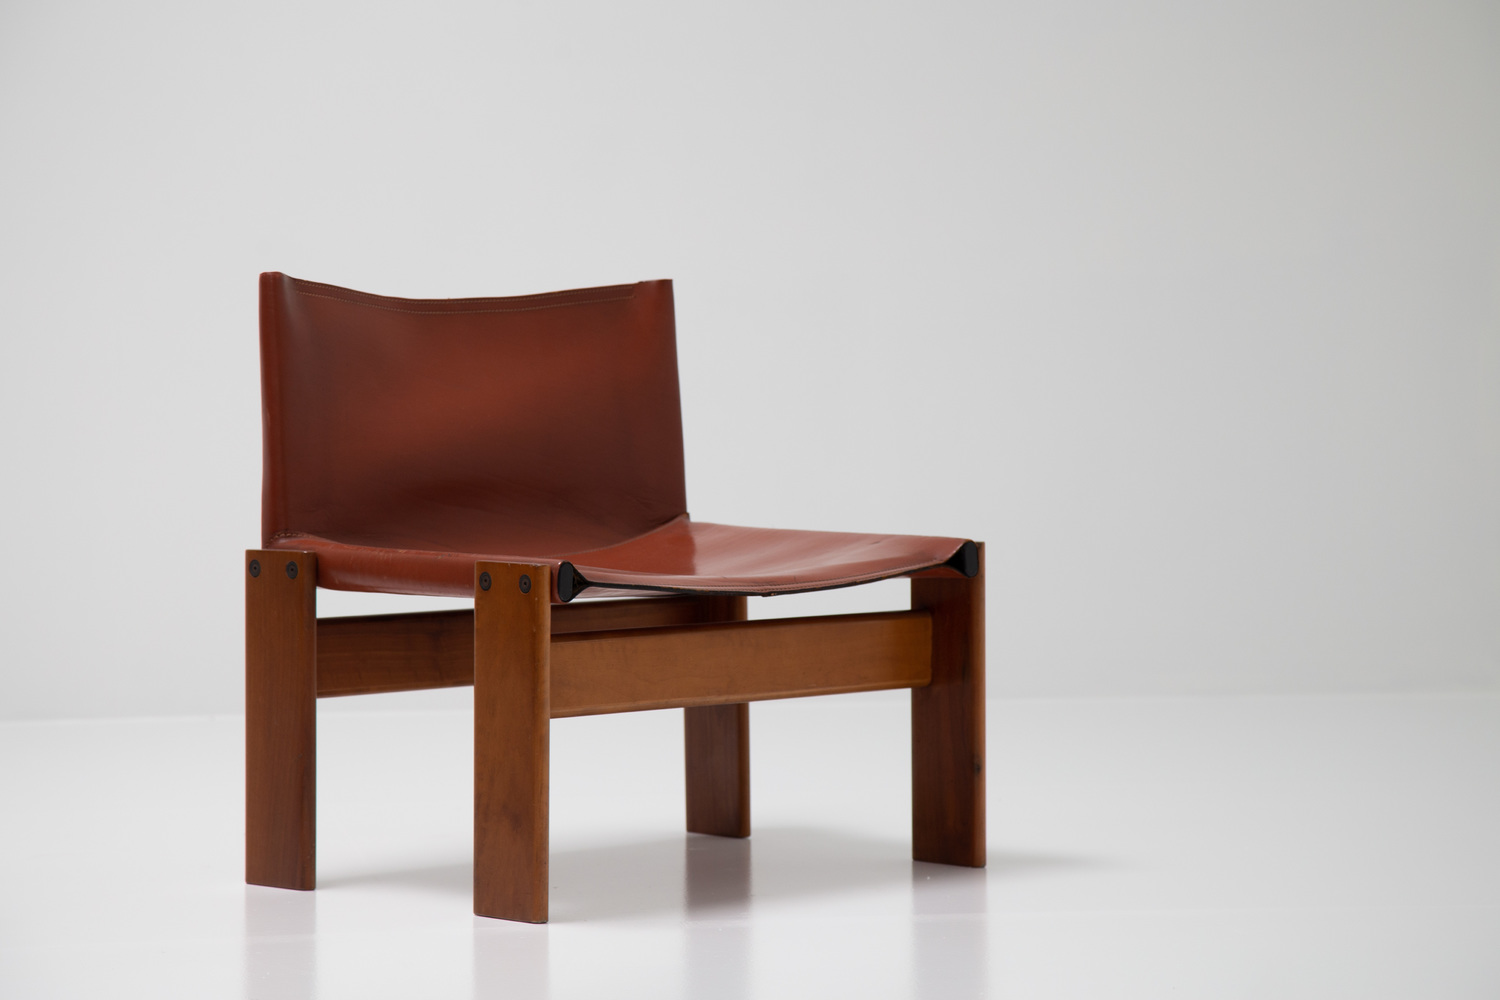 Pair of low 'Monk' chairs by Afra & Tobia Scarpa